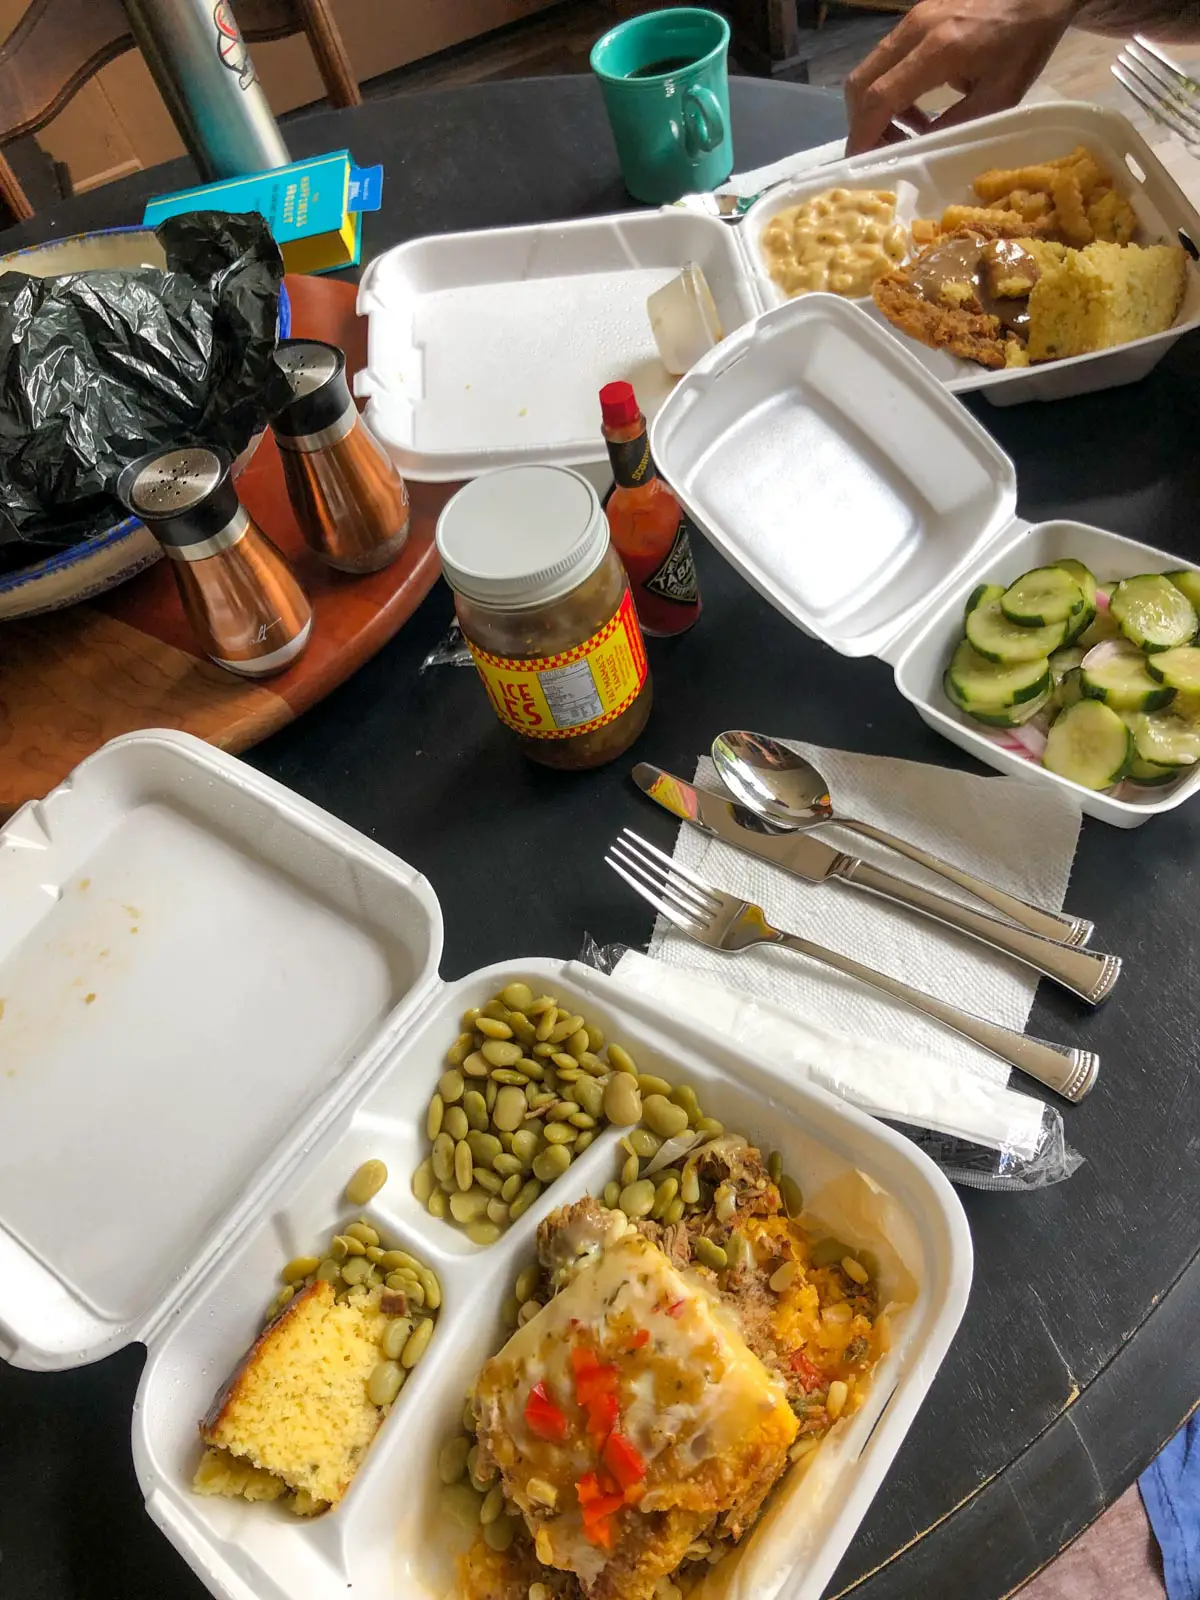 Hot tamale pie, butter beans and corn bread in a styrofoam container, cutlery and napkins, various condiments, cucumber and onions in a styrofoam container and a cup of coffee.